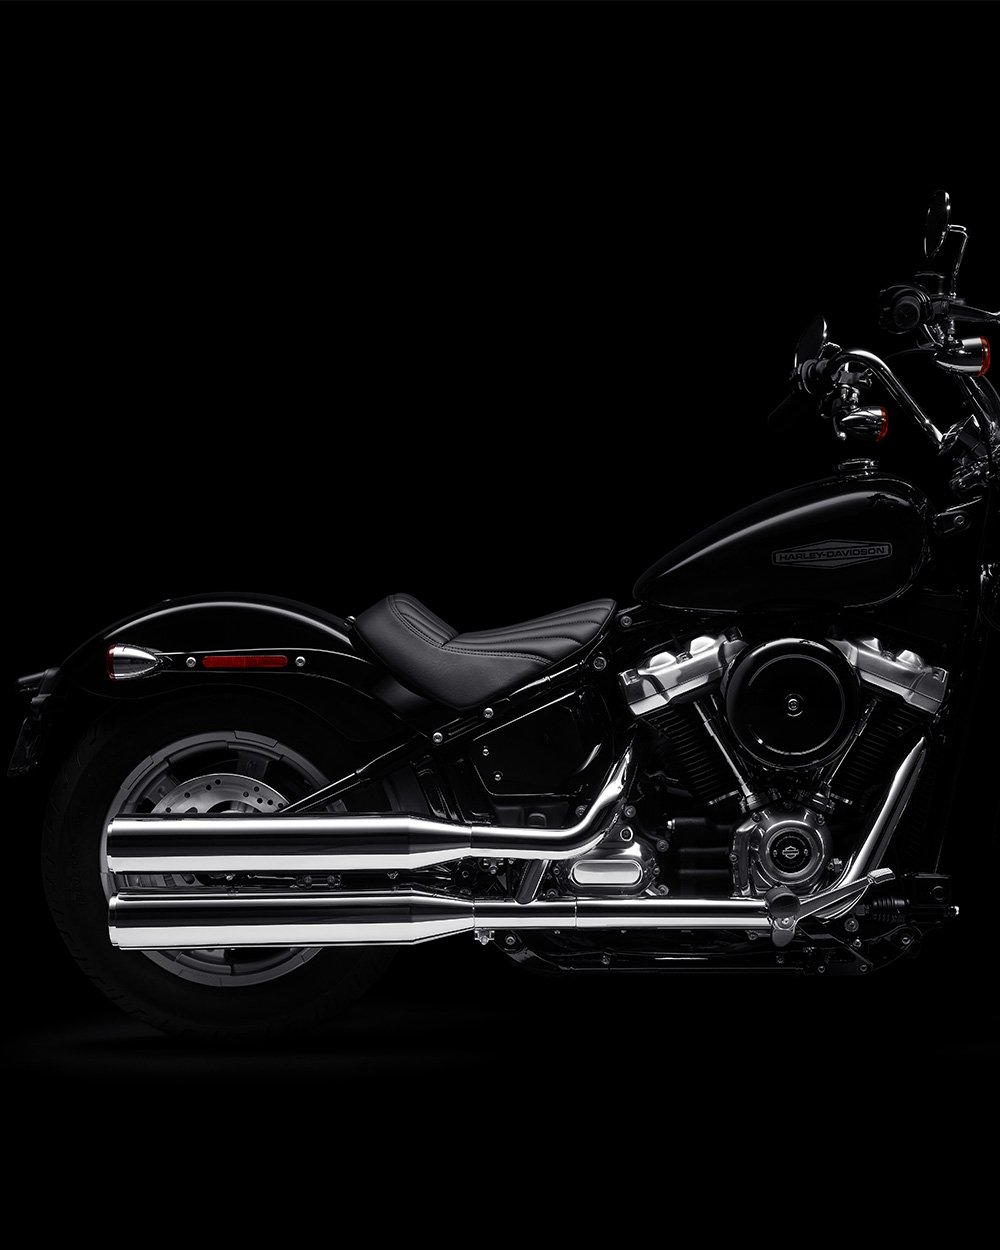 2022 Softail Standard motorcycle frame